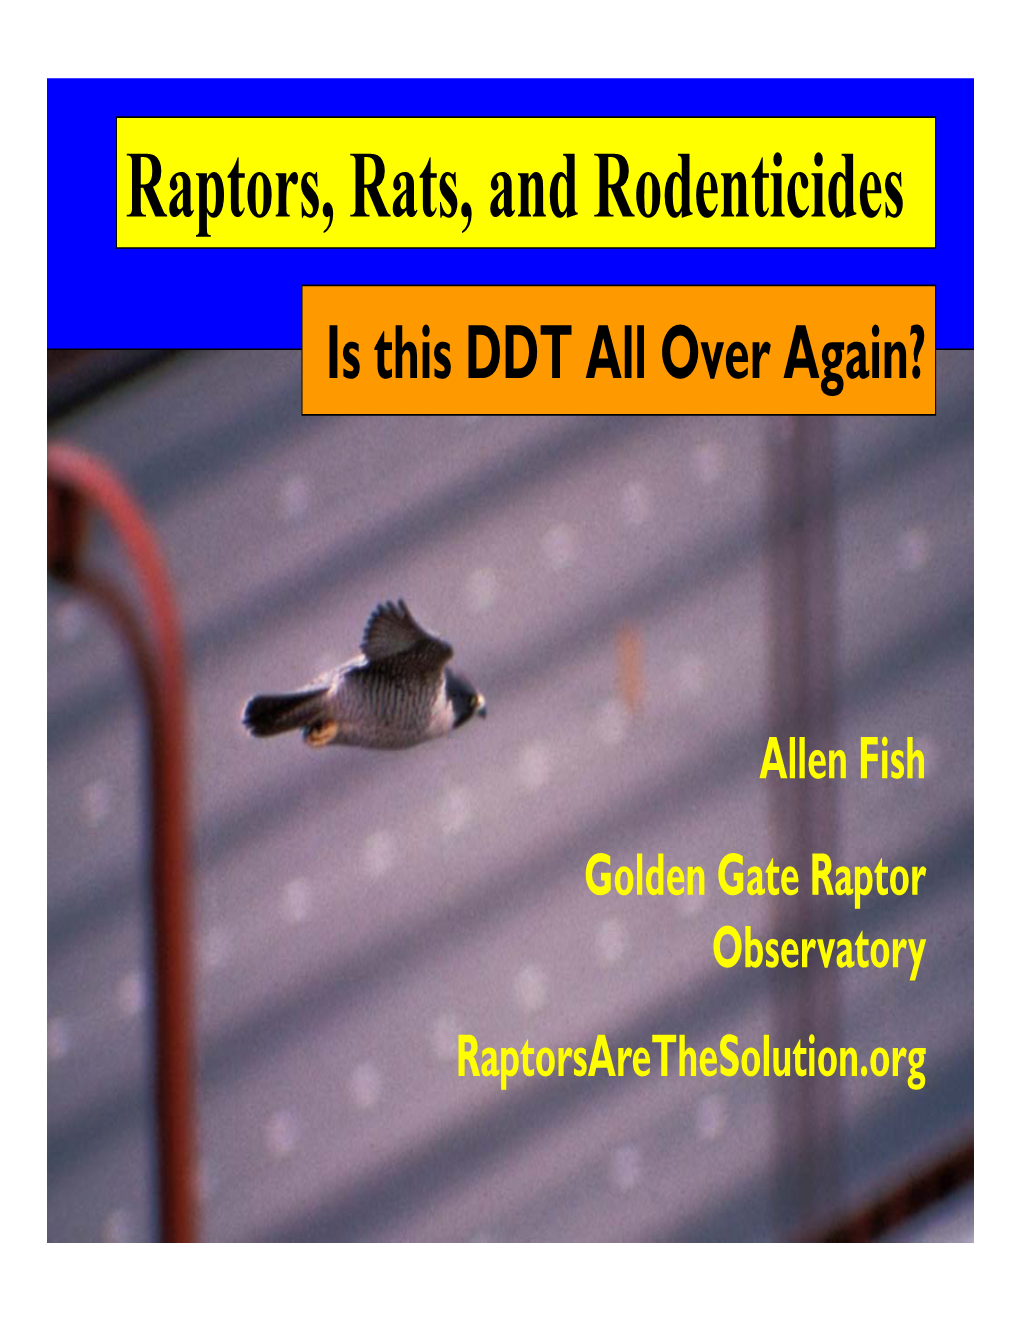 Raptors, Rats, and Rodenticides – Is This DDT All Over Again?